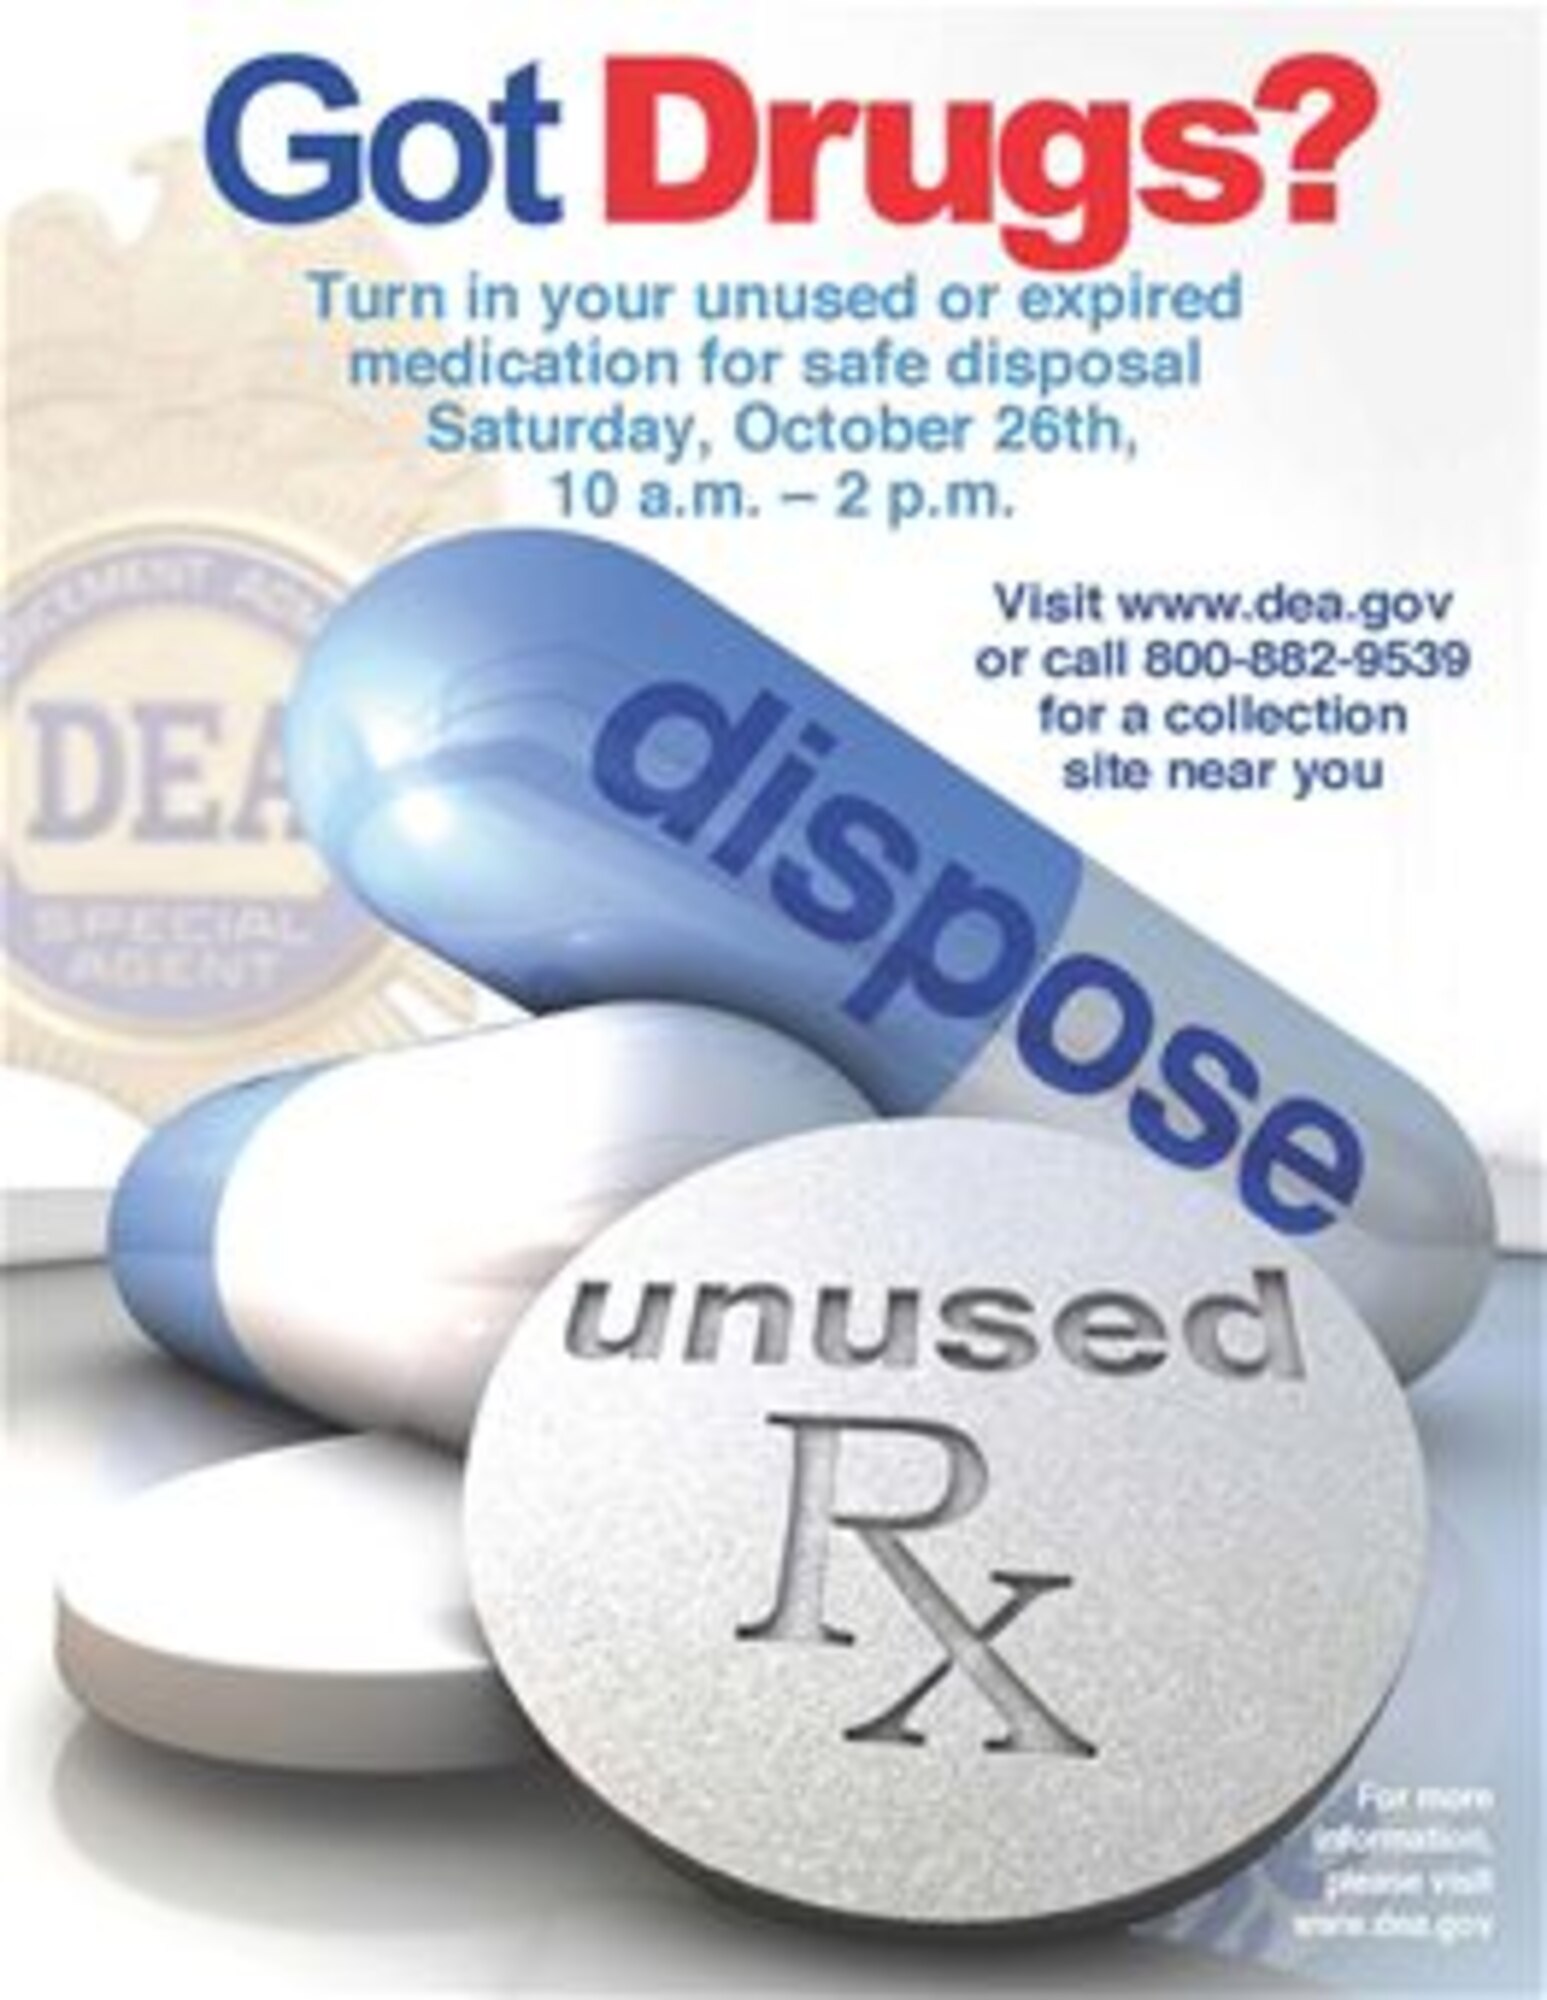 The Buckley Pharmacy is teaming up with law enforcement agencies from 10 a.m. to 2 p.m. Oct. 26, 2013, at the Commissary during National Prescription Drug Take Back Day in order to provide a safe way of disposing expired, unwanted or dangerous drugs stored at home. The free service aims to provide a safe, convenient and responsible means of disposing of prescription drugs, while also educating the general public about the potential for abuse of medications. (Courtesy Graphic)